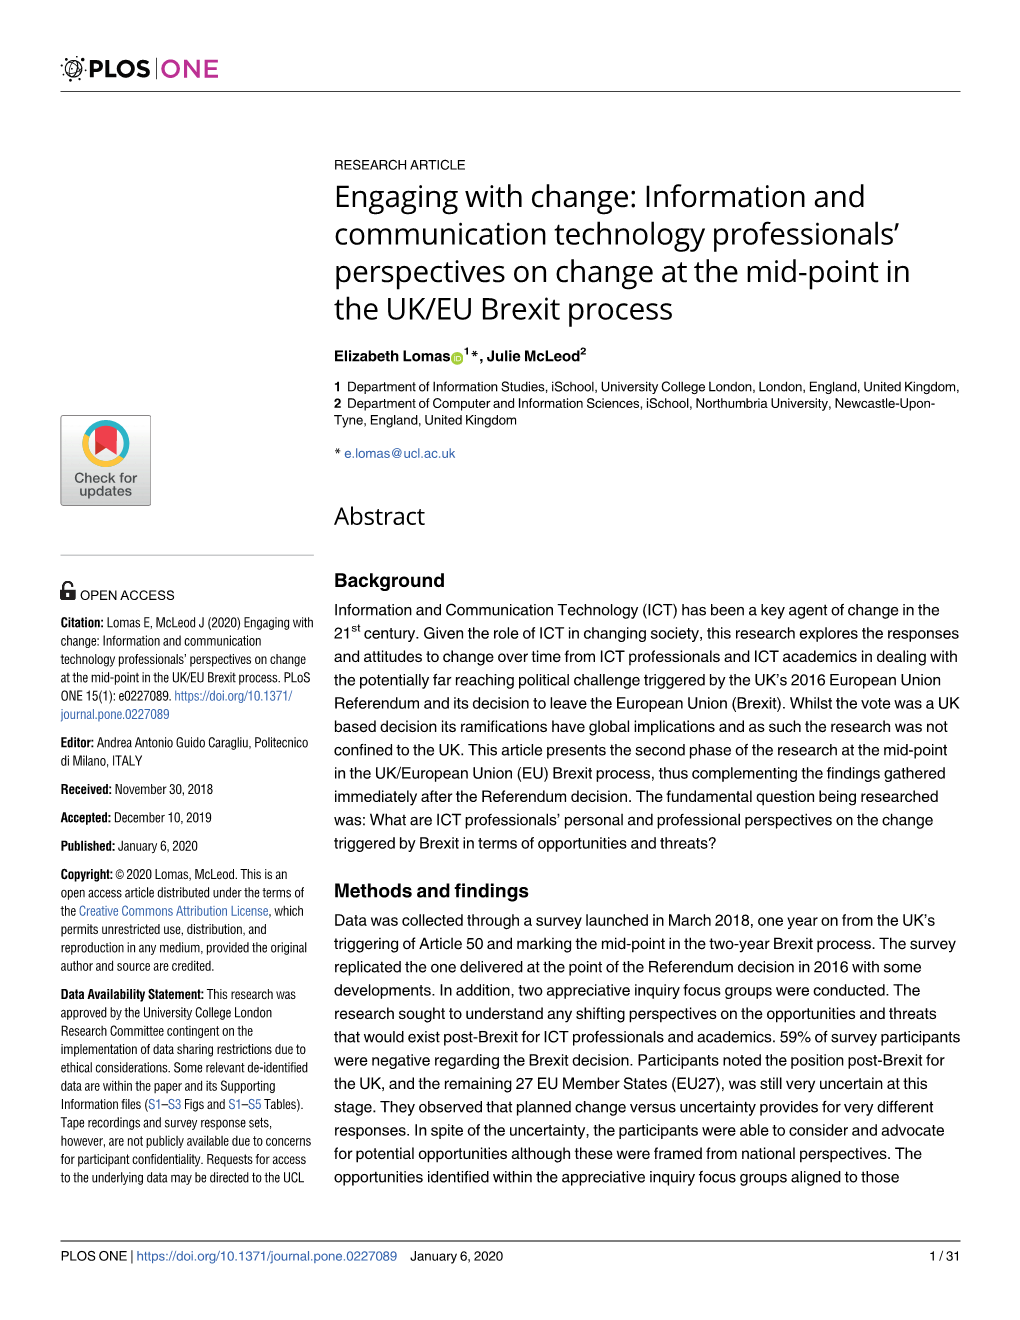 Information and Communication Technology Professionals’ Perspectives on Change at the Mid-Point in the UK/EU Brexit Process